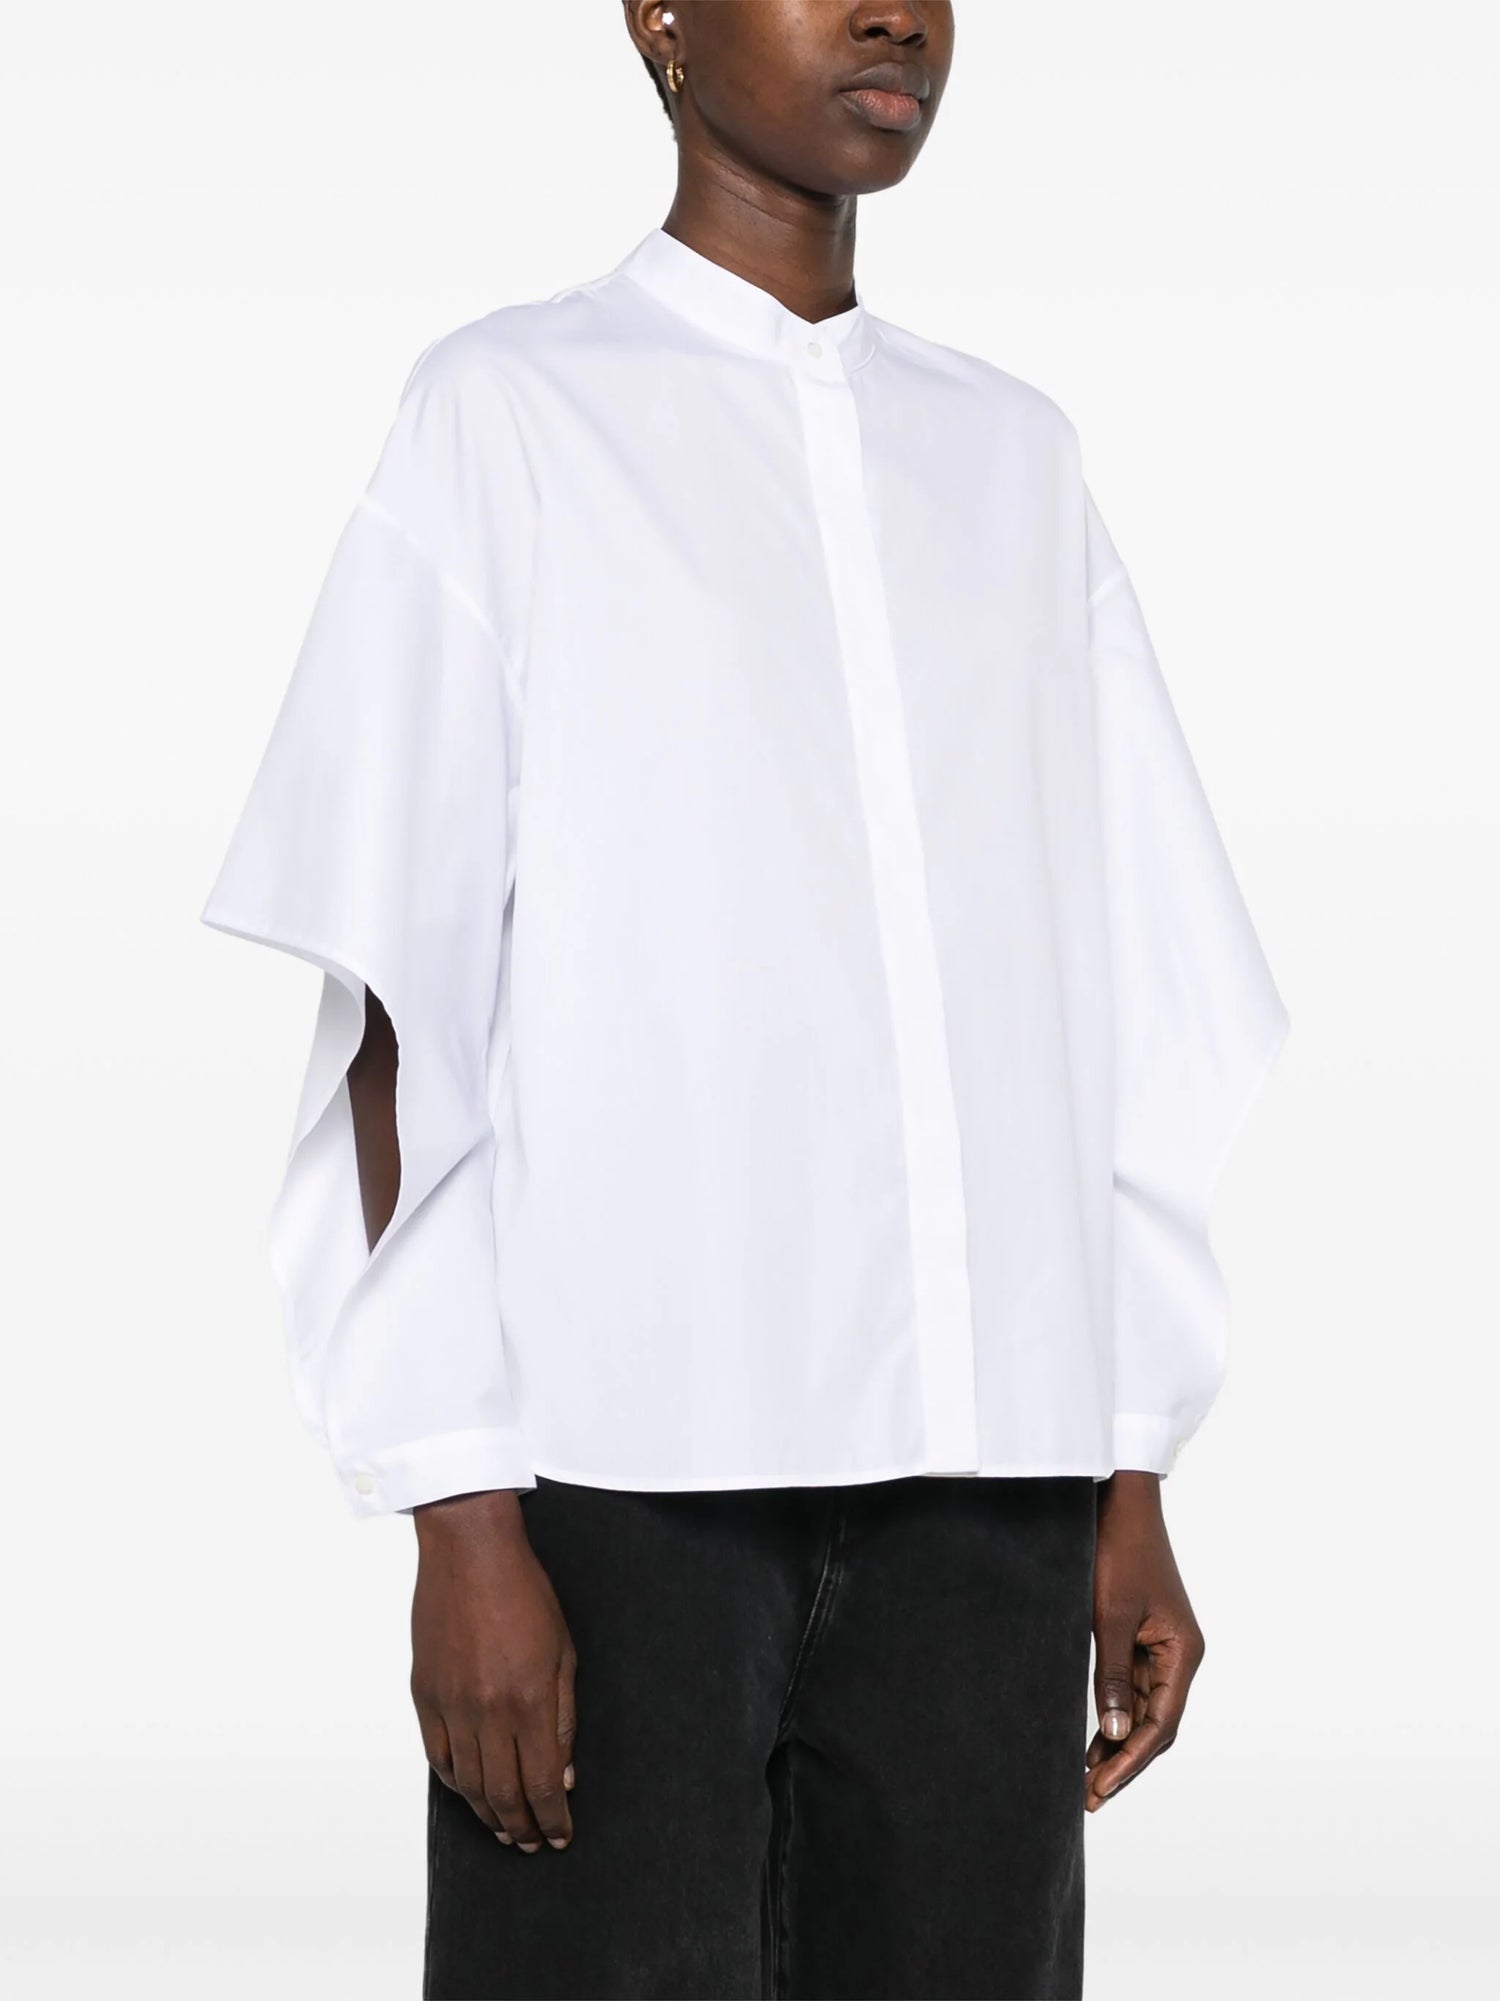 Cotton poplin shirt with cut-out sleeves, white